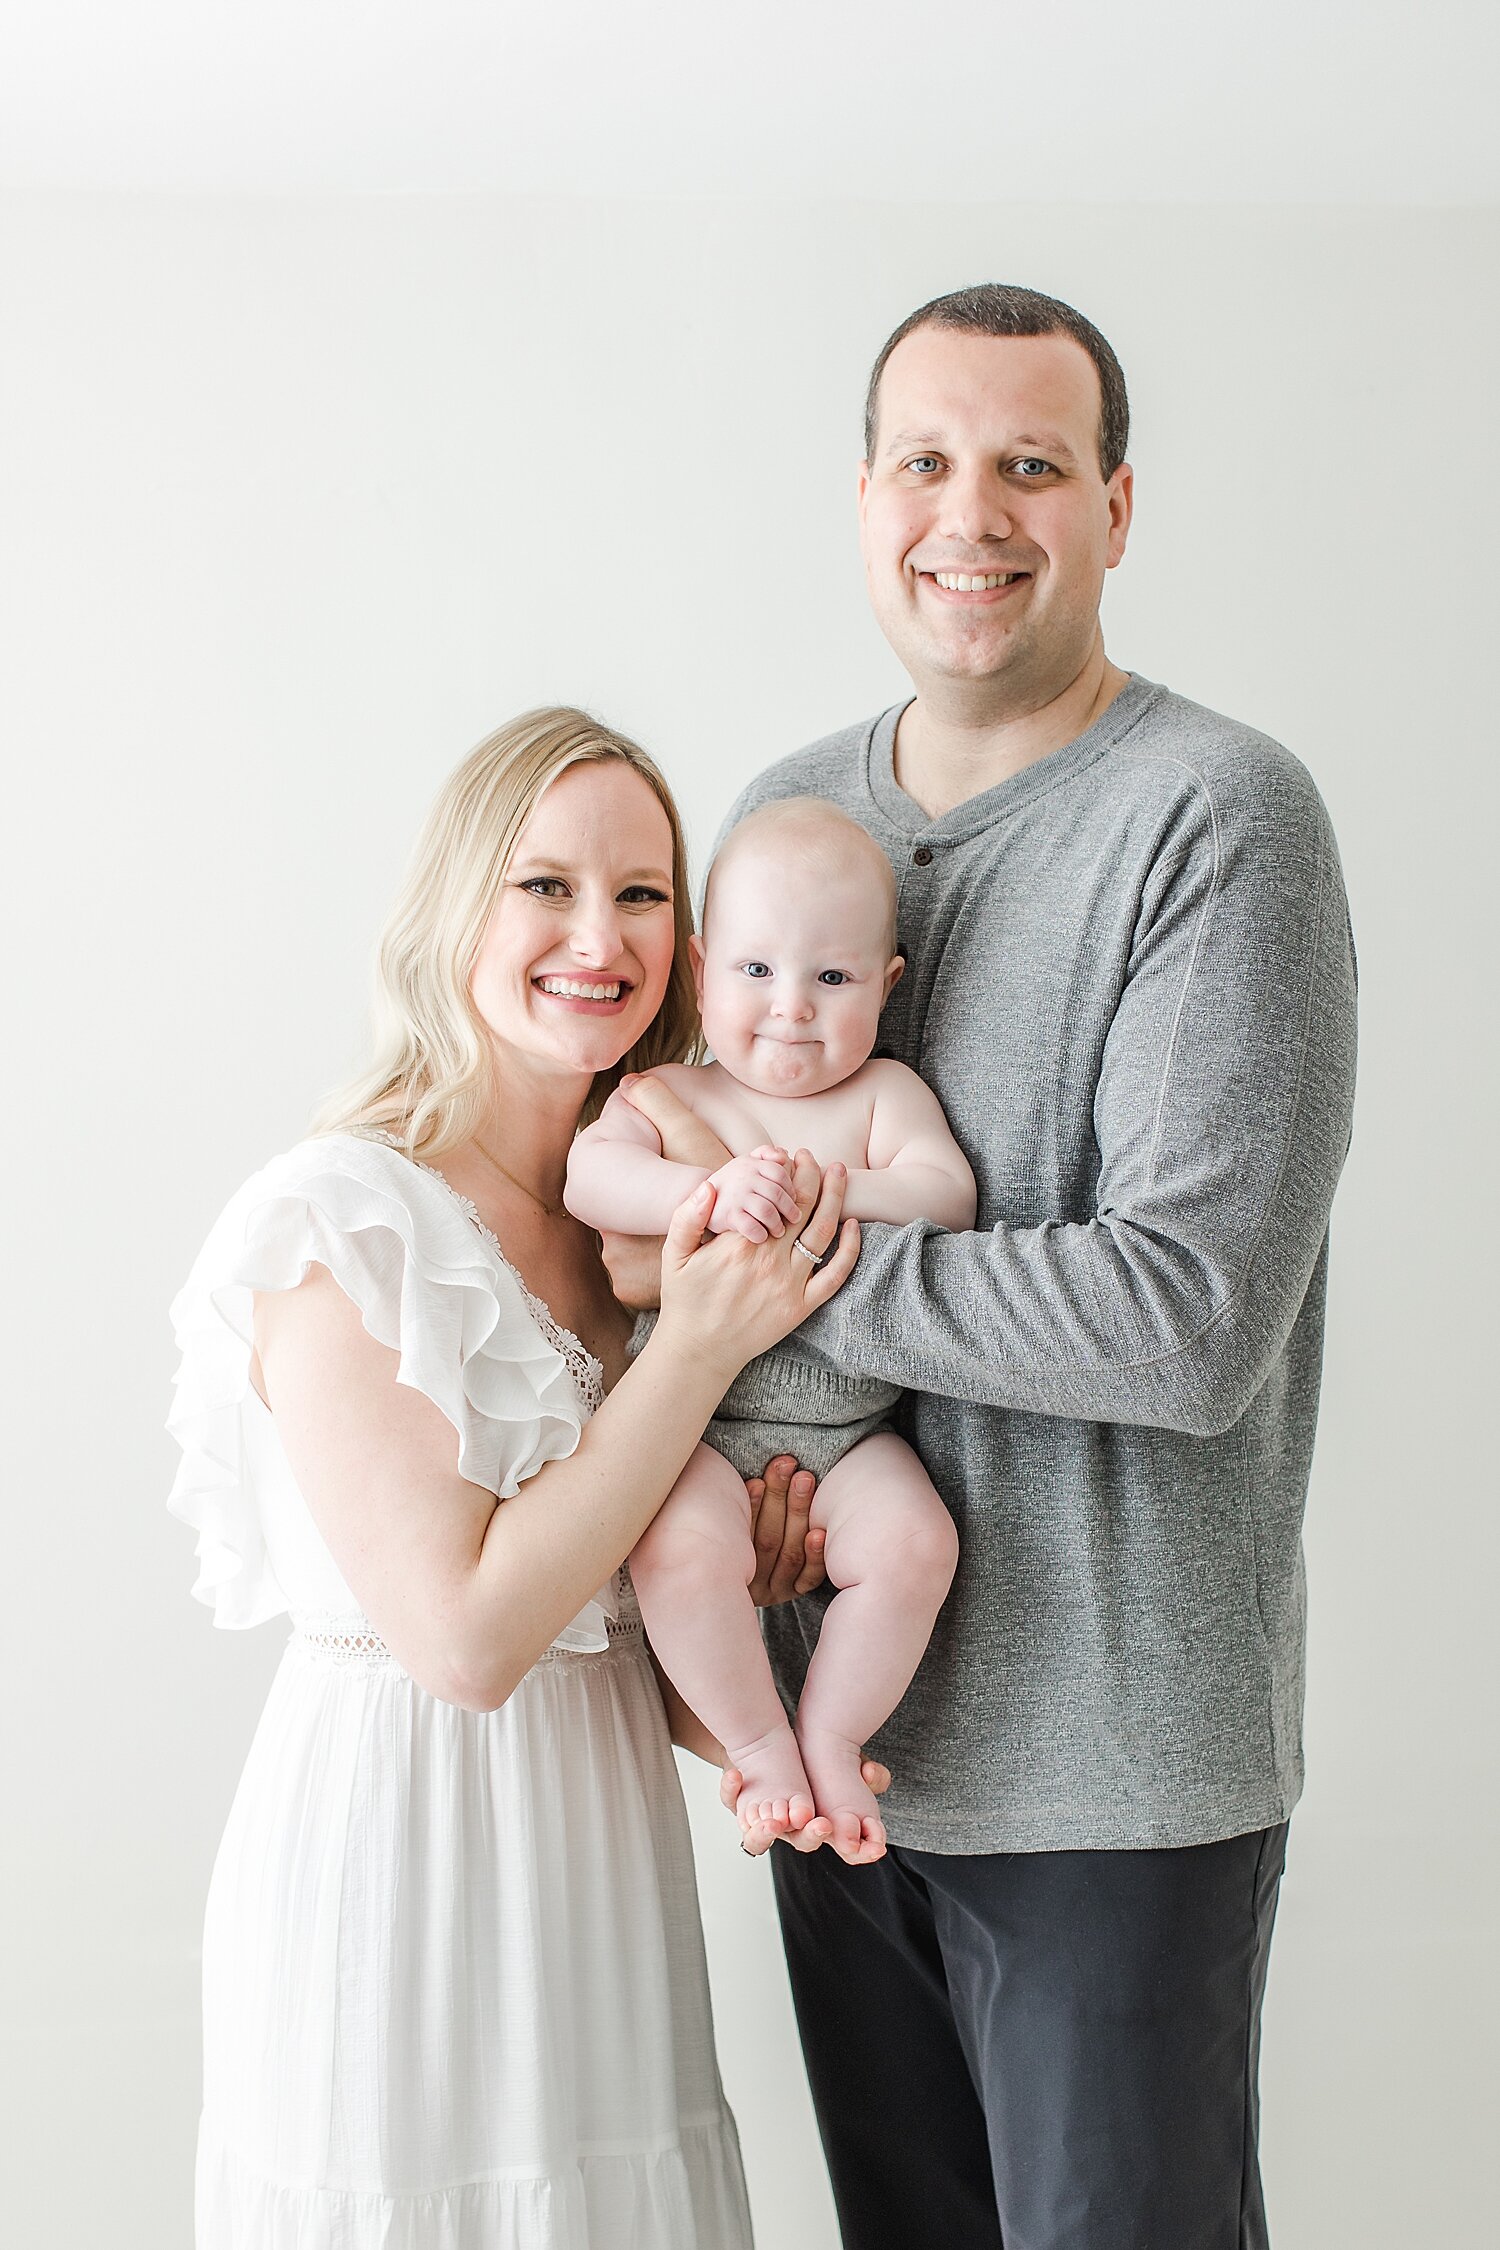 Family portrait during studio milestone session for 8 month old baby boy. Photo by CT Newborn and Family Photographer, Kristin Wood Photography.